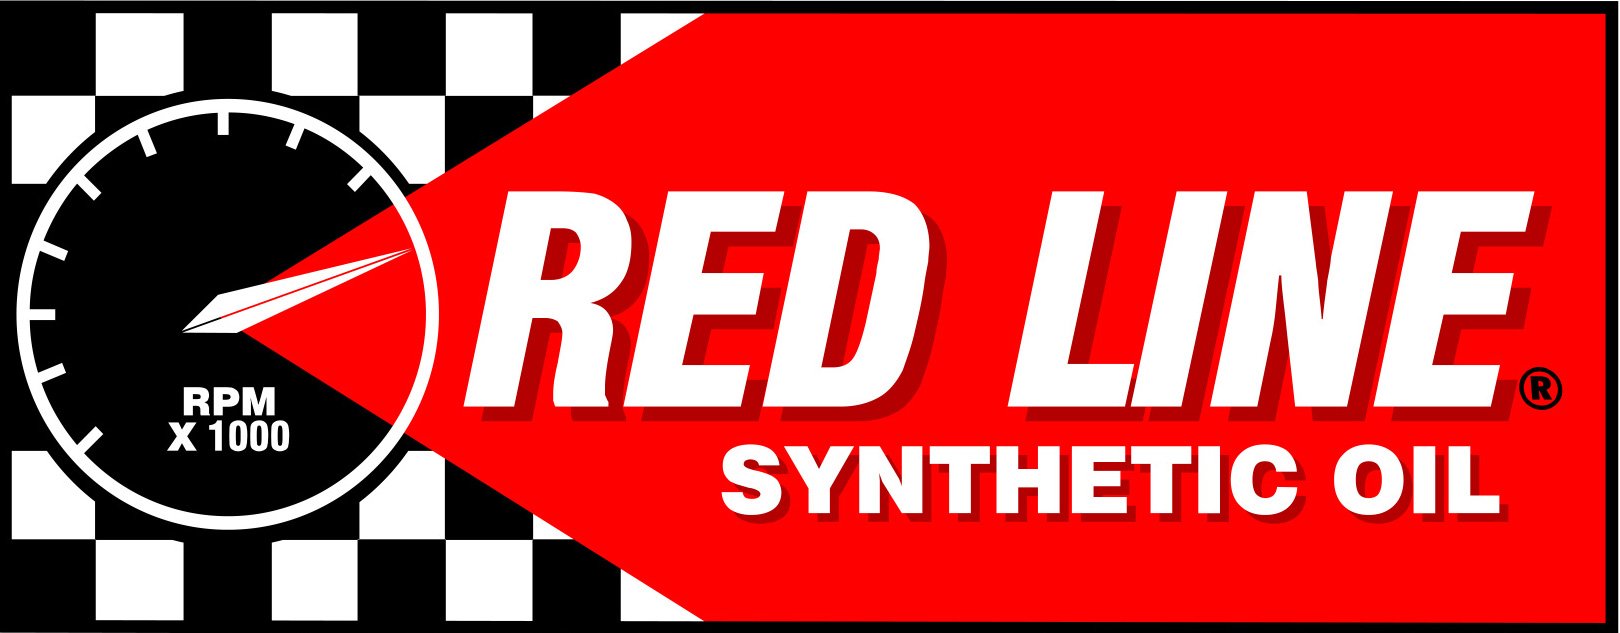 Solo Performance Specialties Red Line Oil Small, 5" x 2 1-2", Printed, Black and Red on White